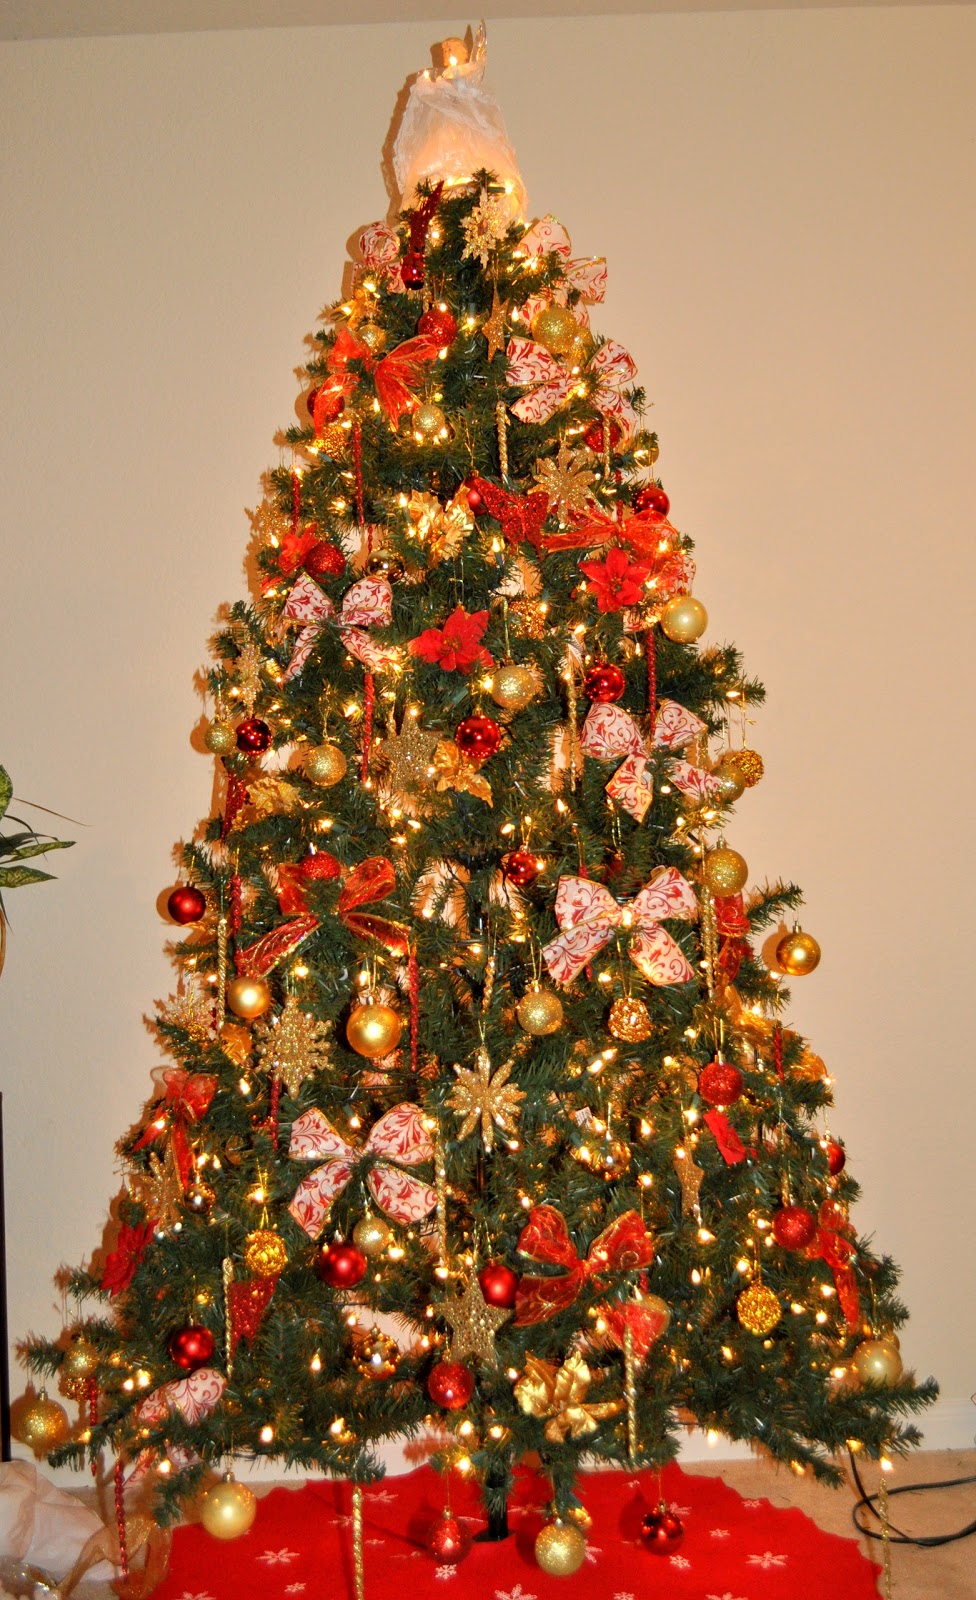 red-and-gold-christmas-tree-decorations